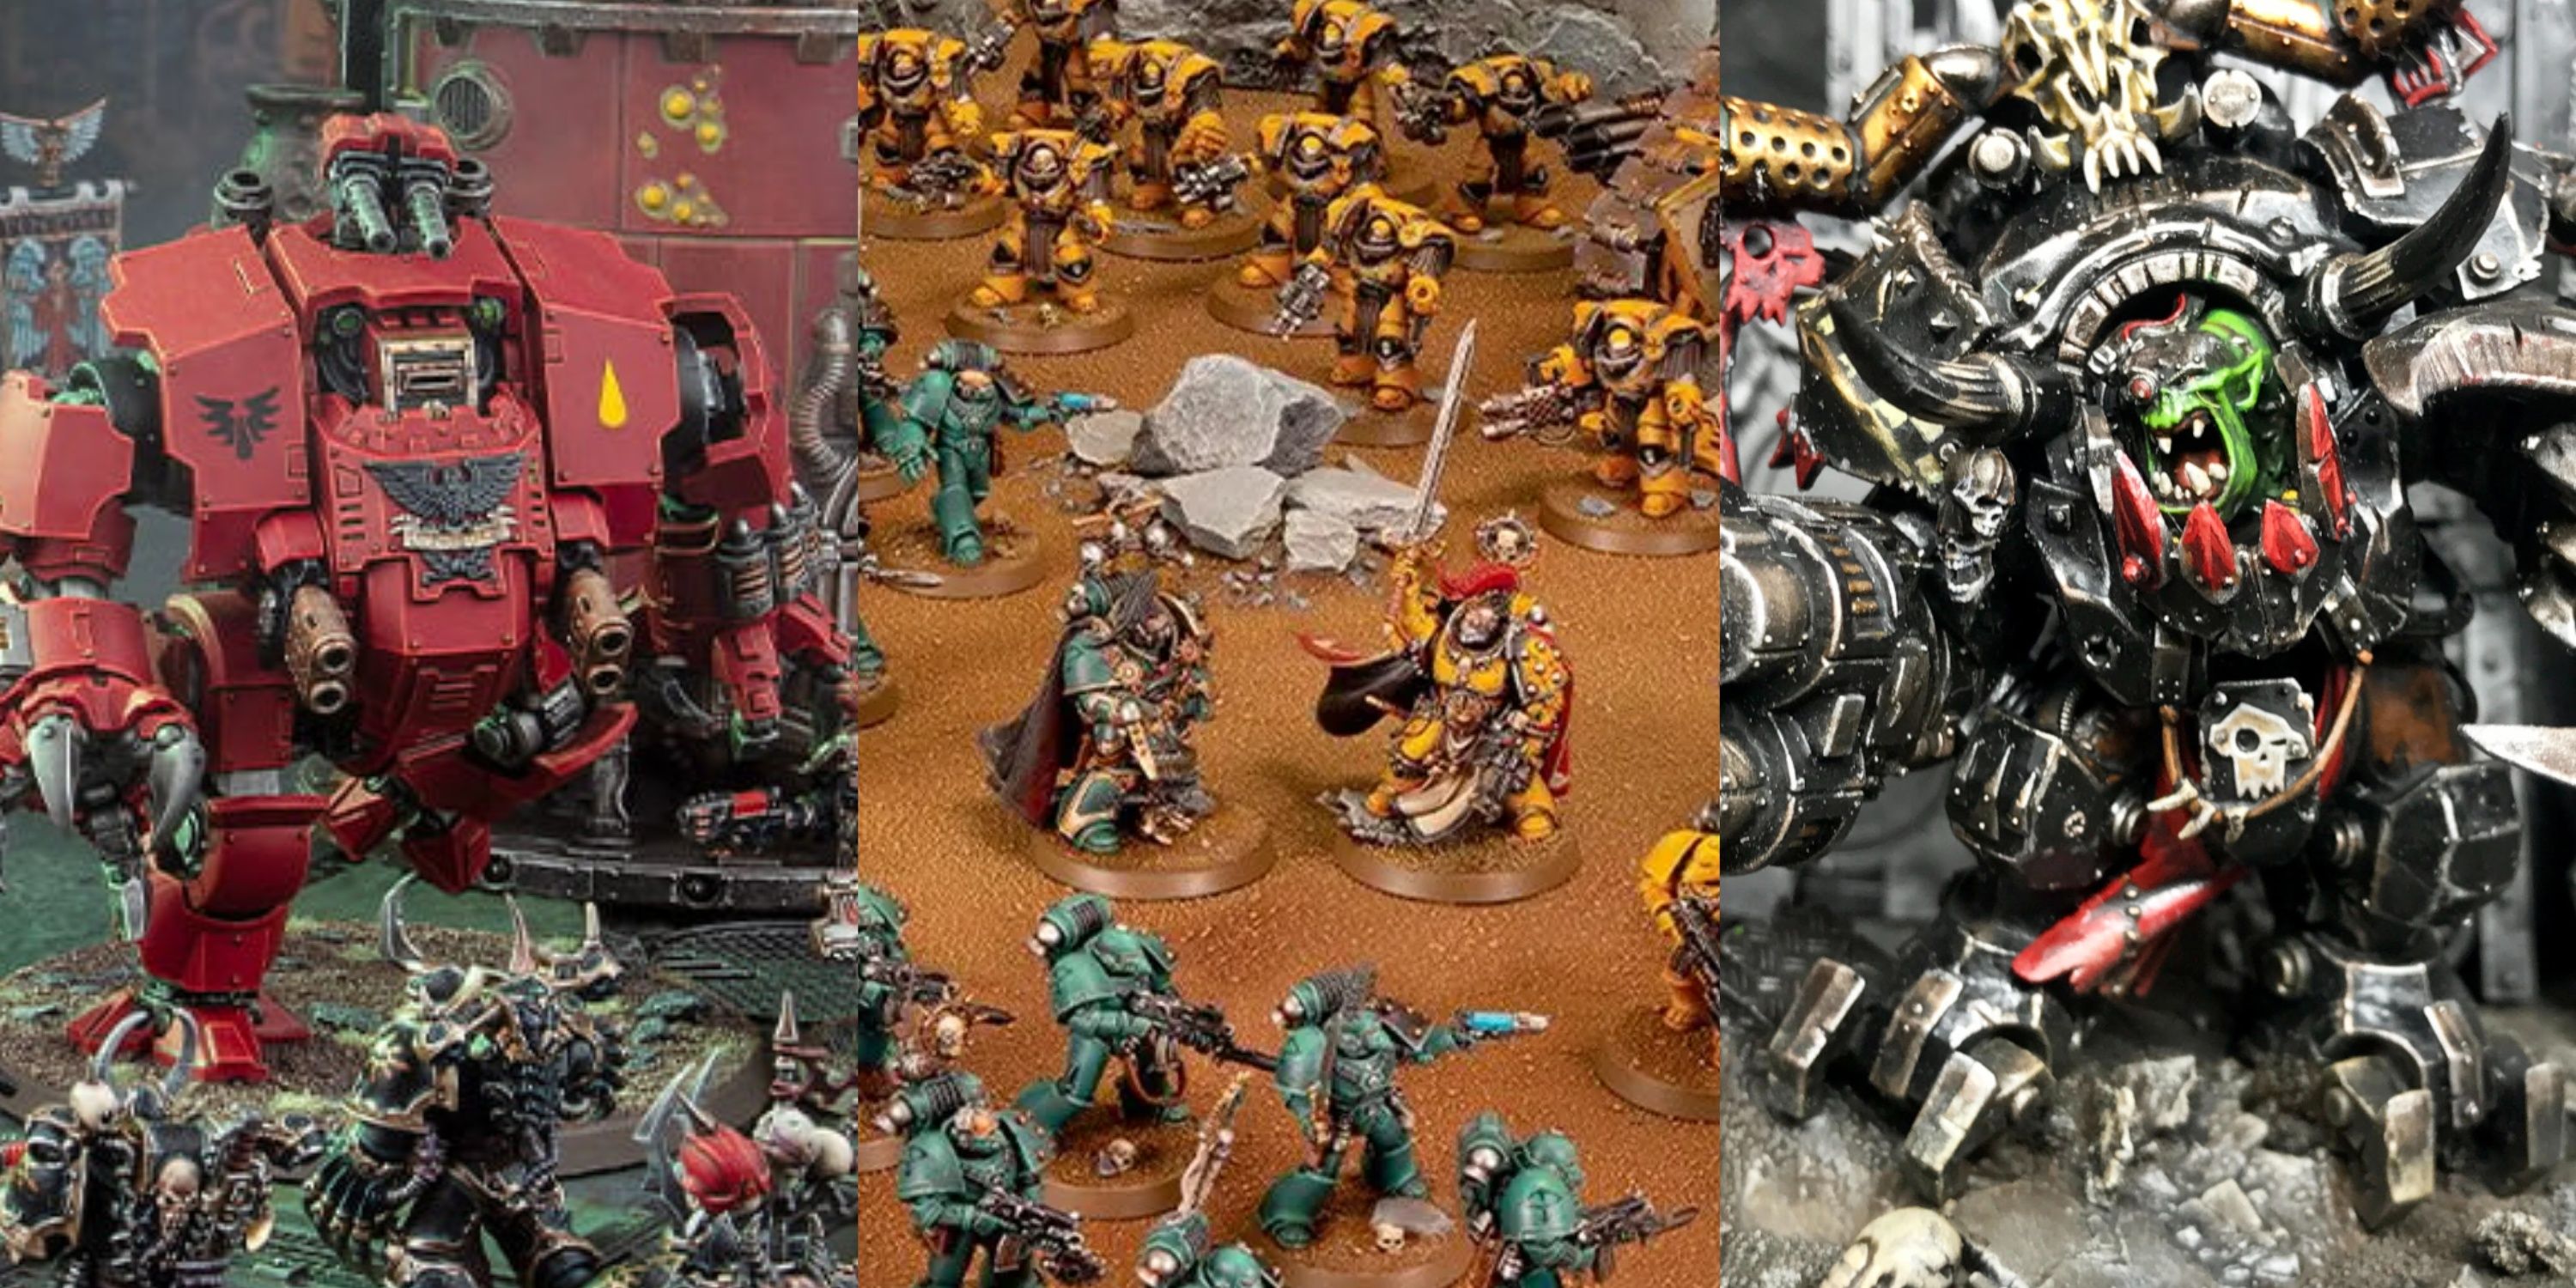 LORE: What the New 'Votann' Are in Warhammer 40k